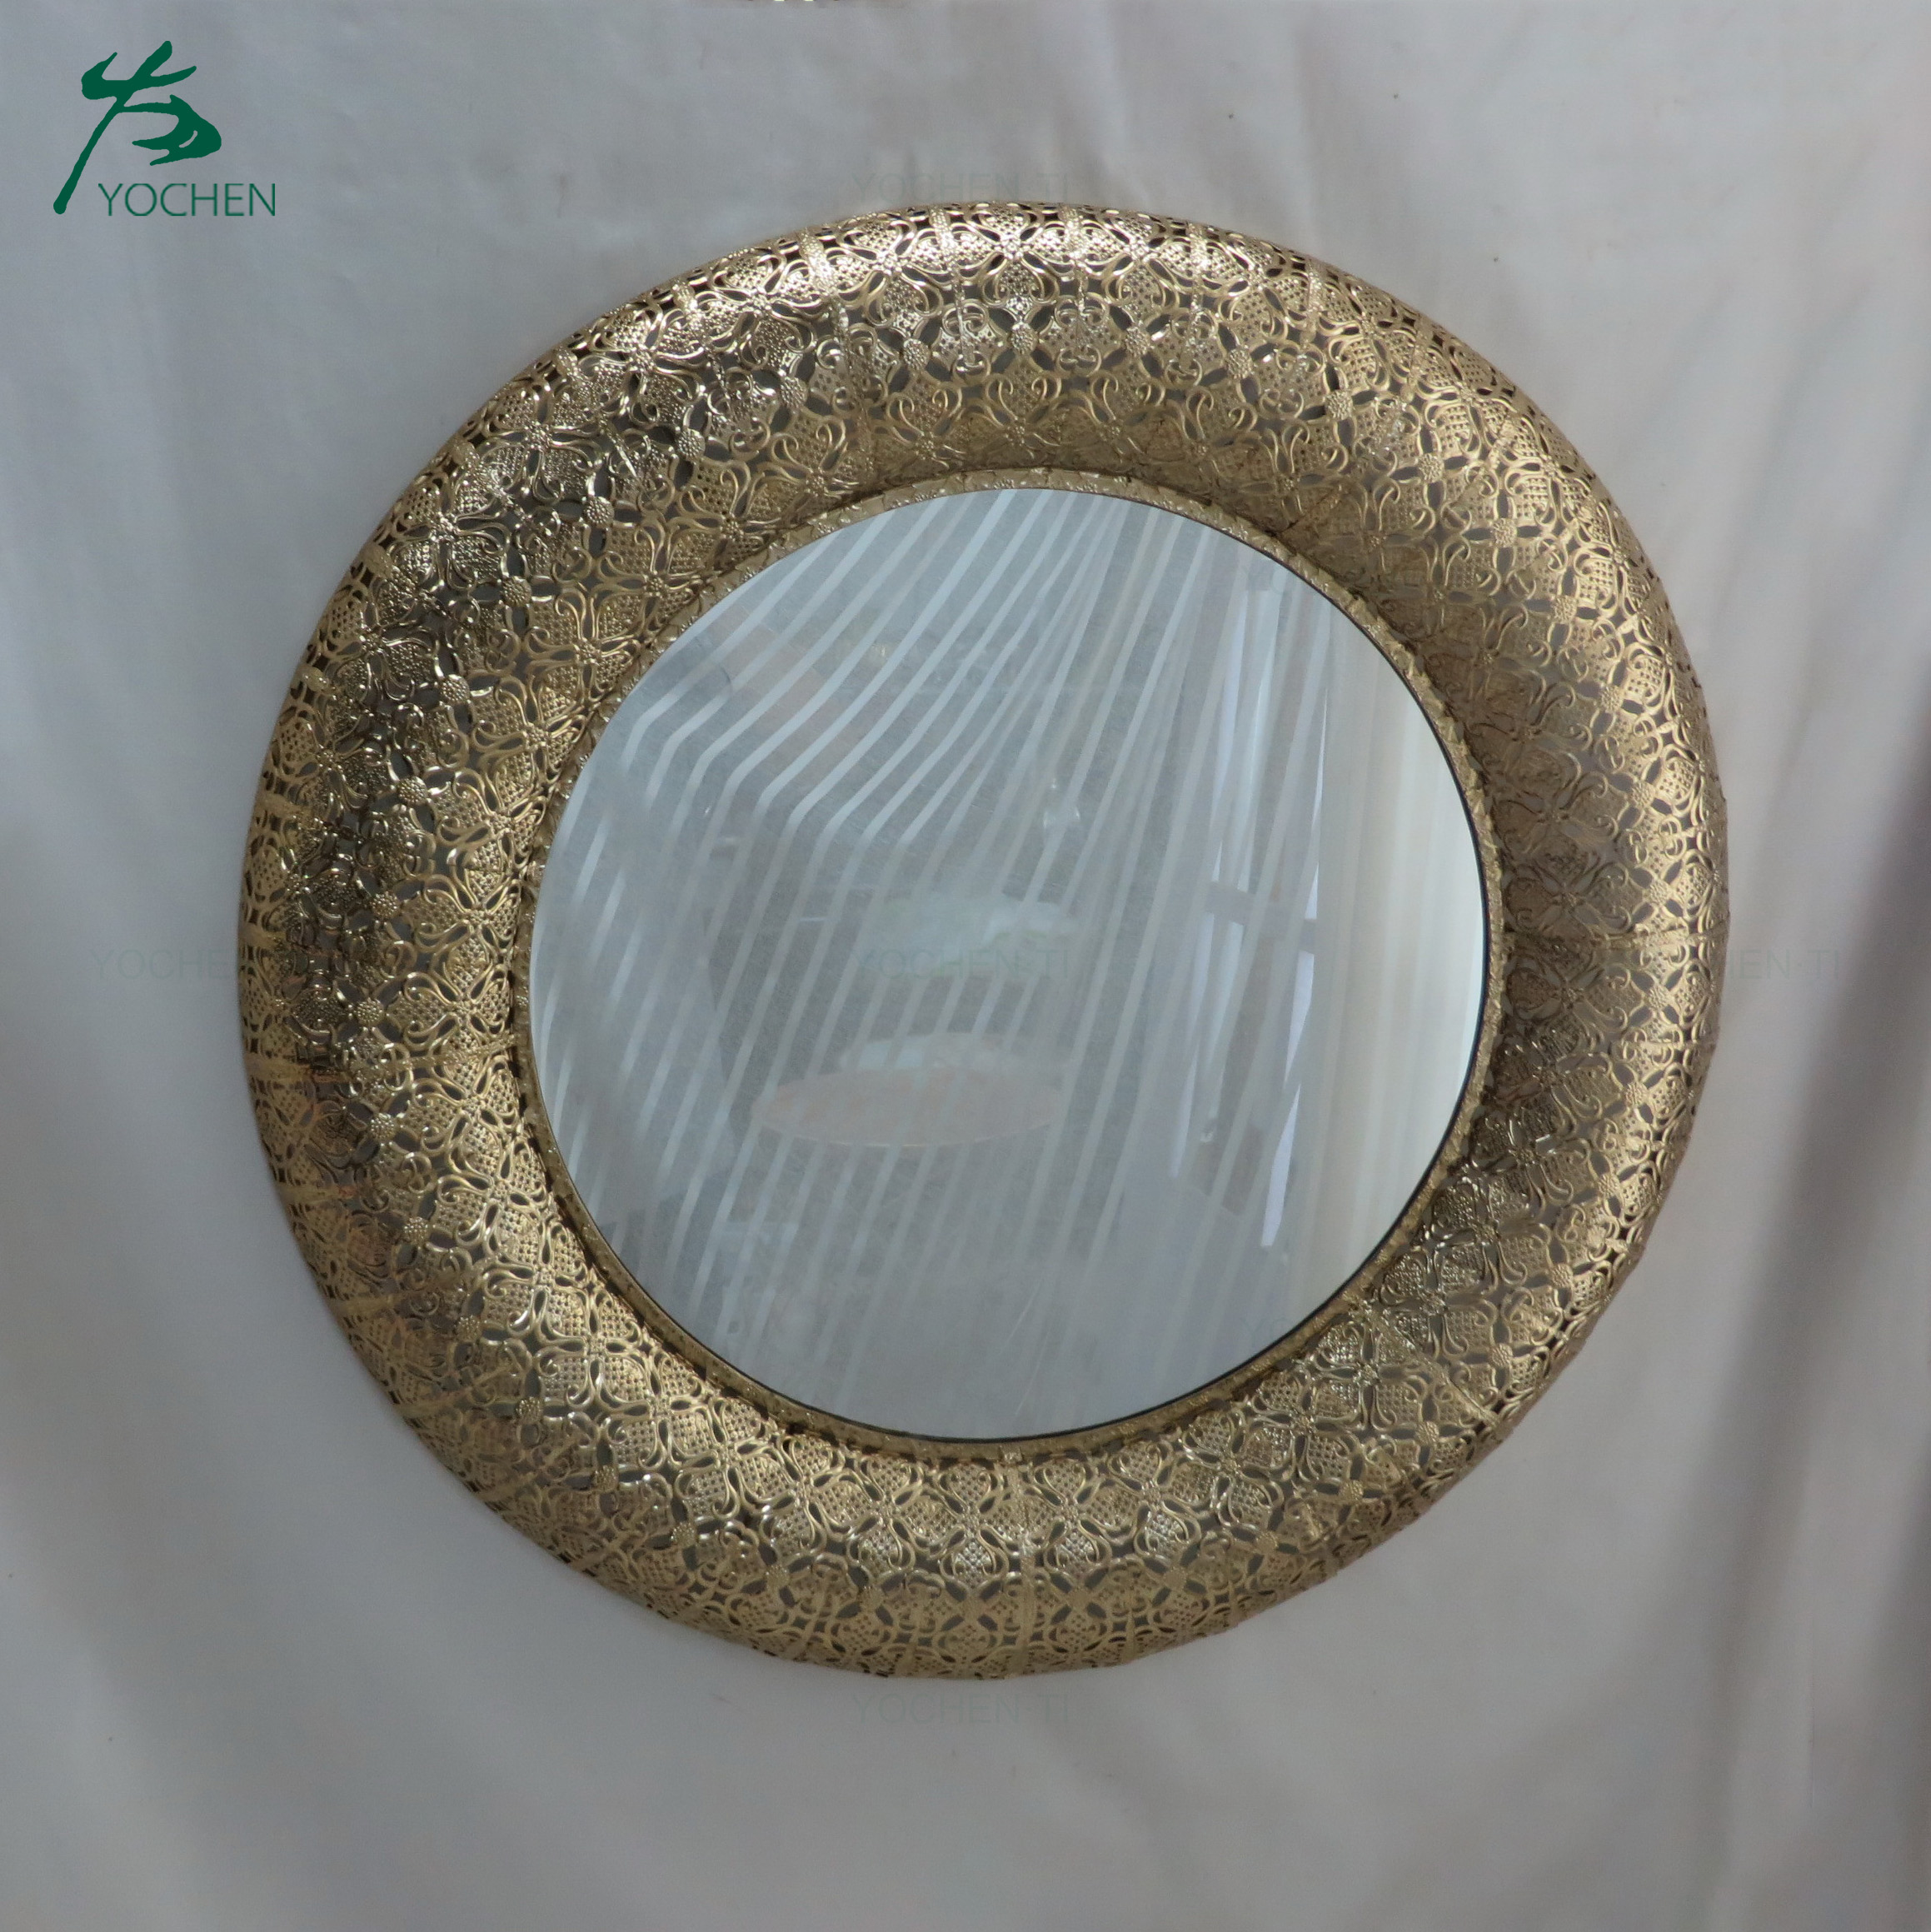 Promotional Round Ornate Decorative Metal Wall Mirror Framed